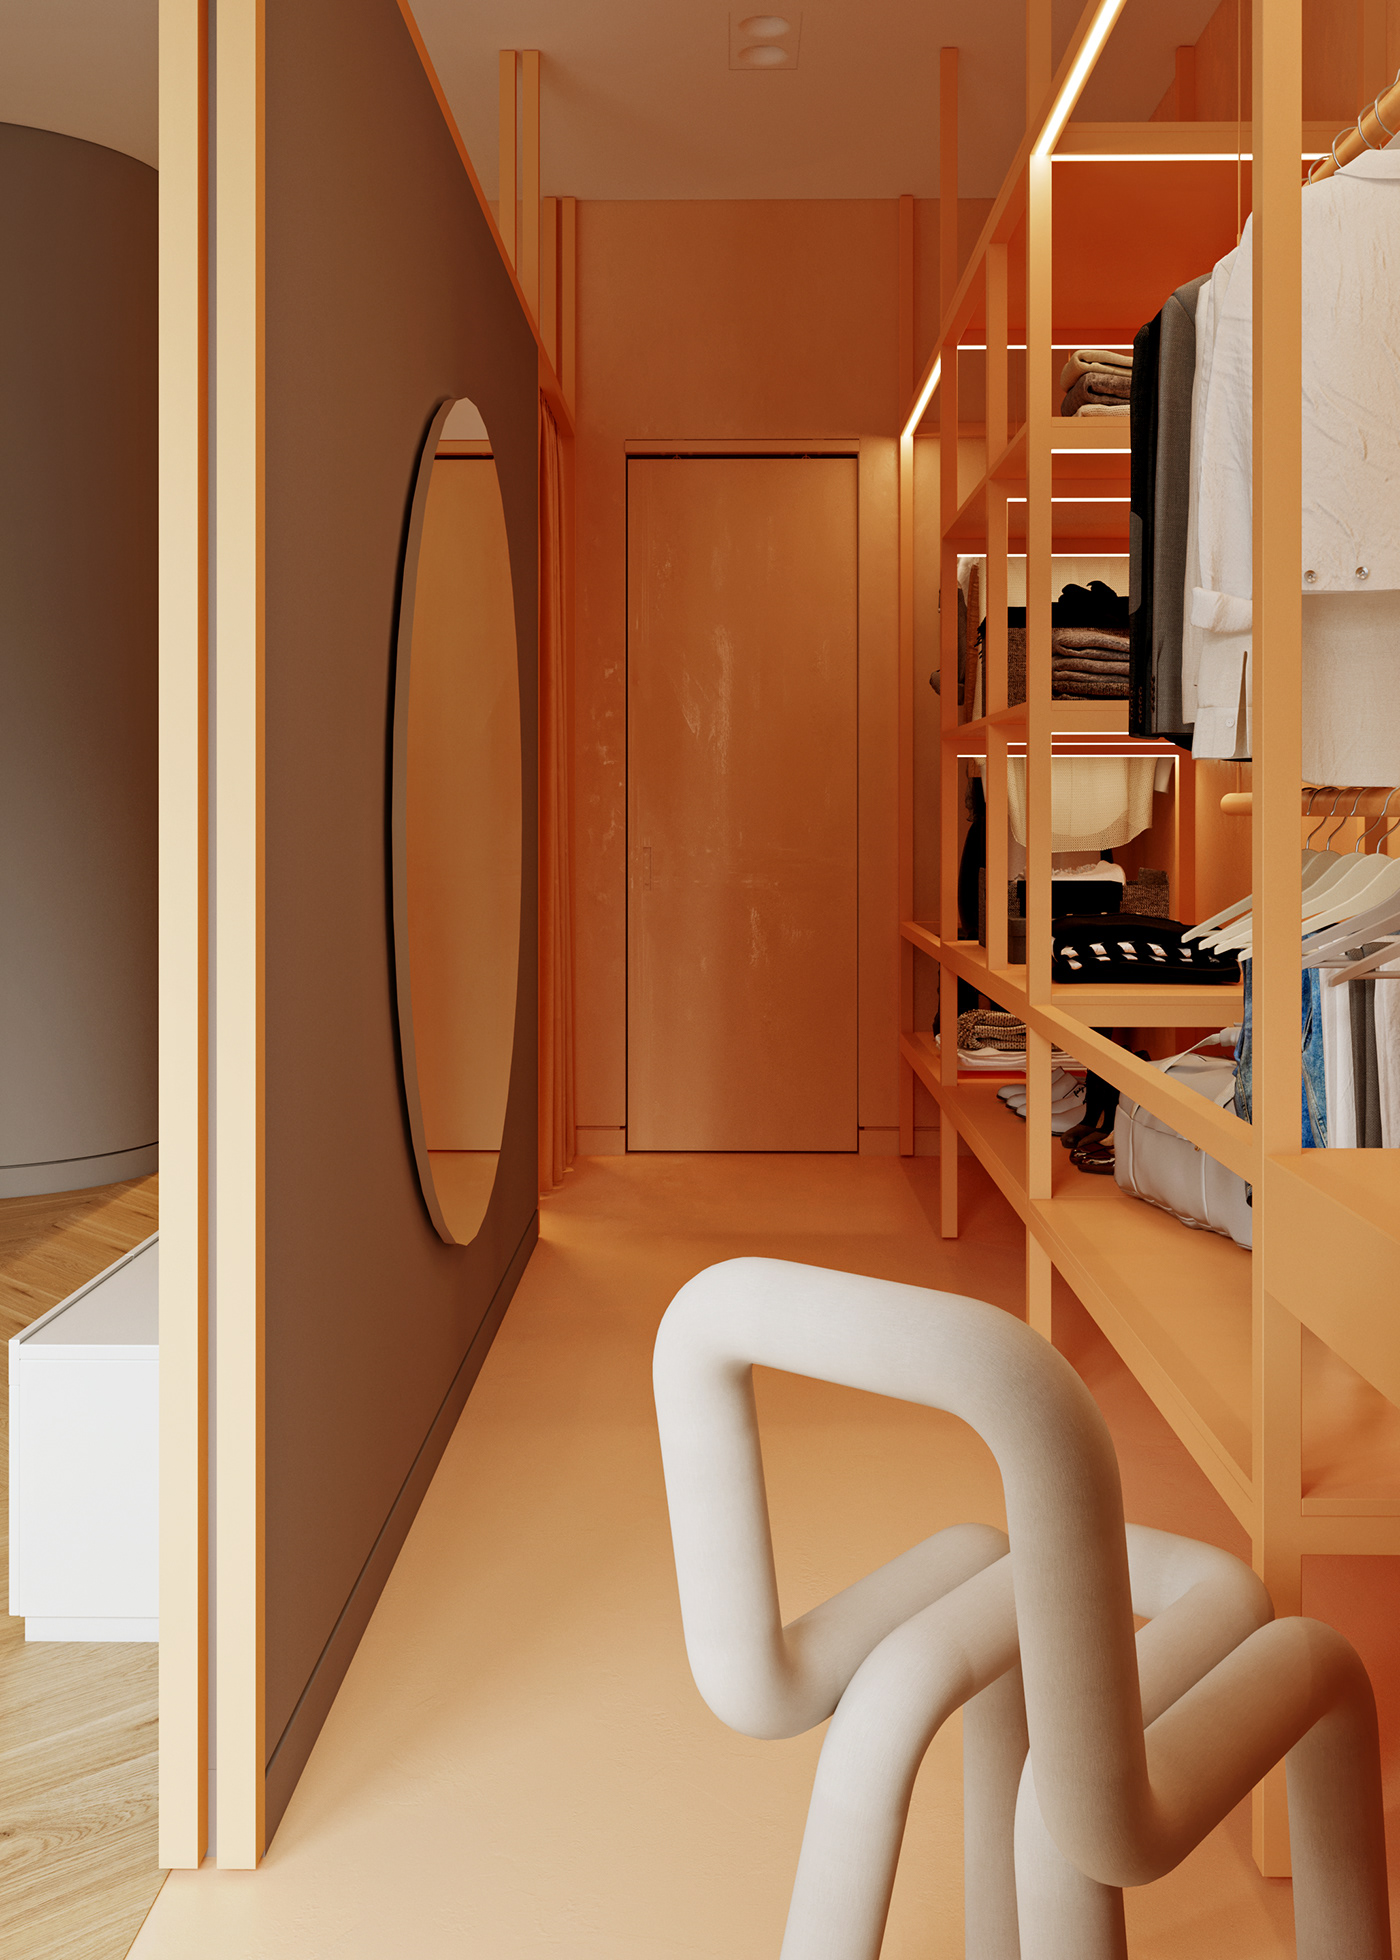 Inside the room, a large wardrobe is also equipped with a big round mirror for the preparation process.